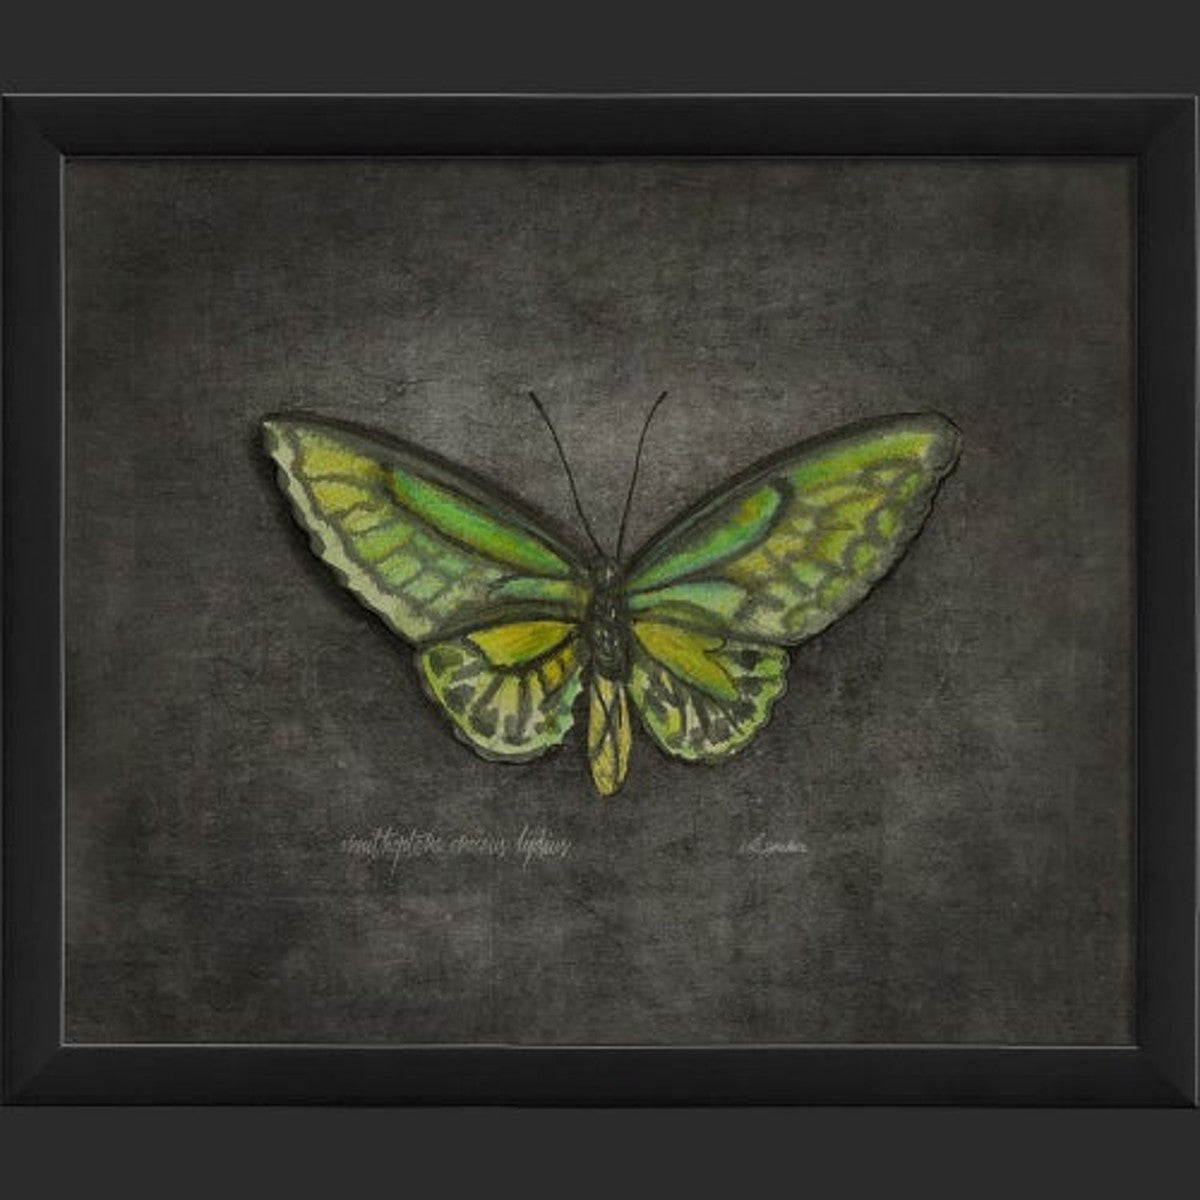 Framed Butterfly Print - Ornithoptera Croceus Lydius